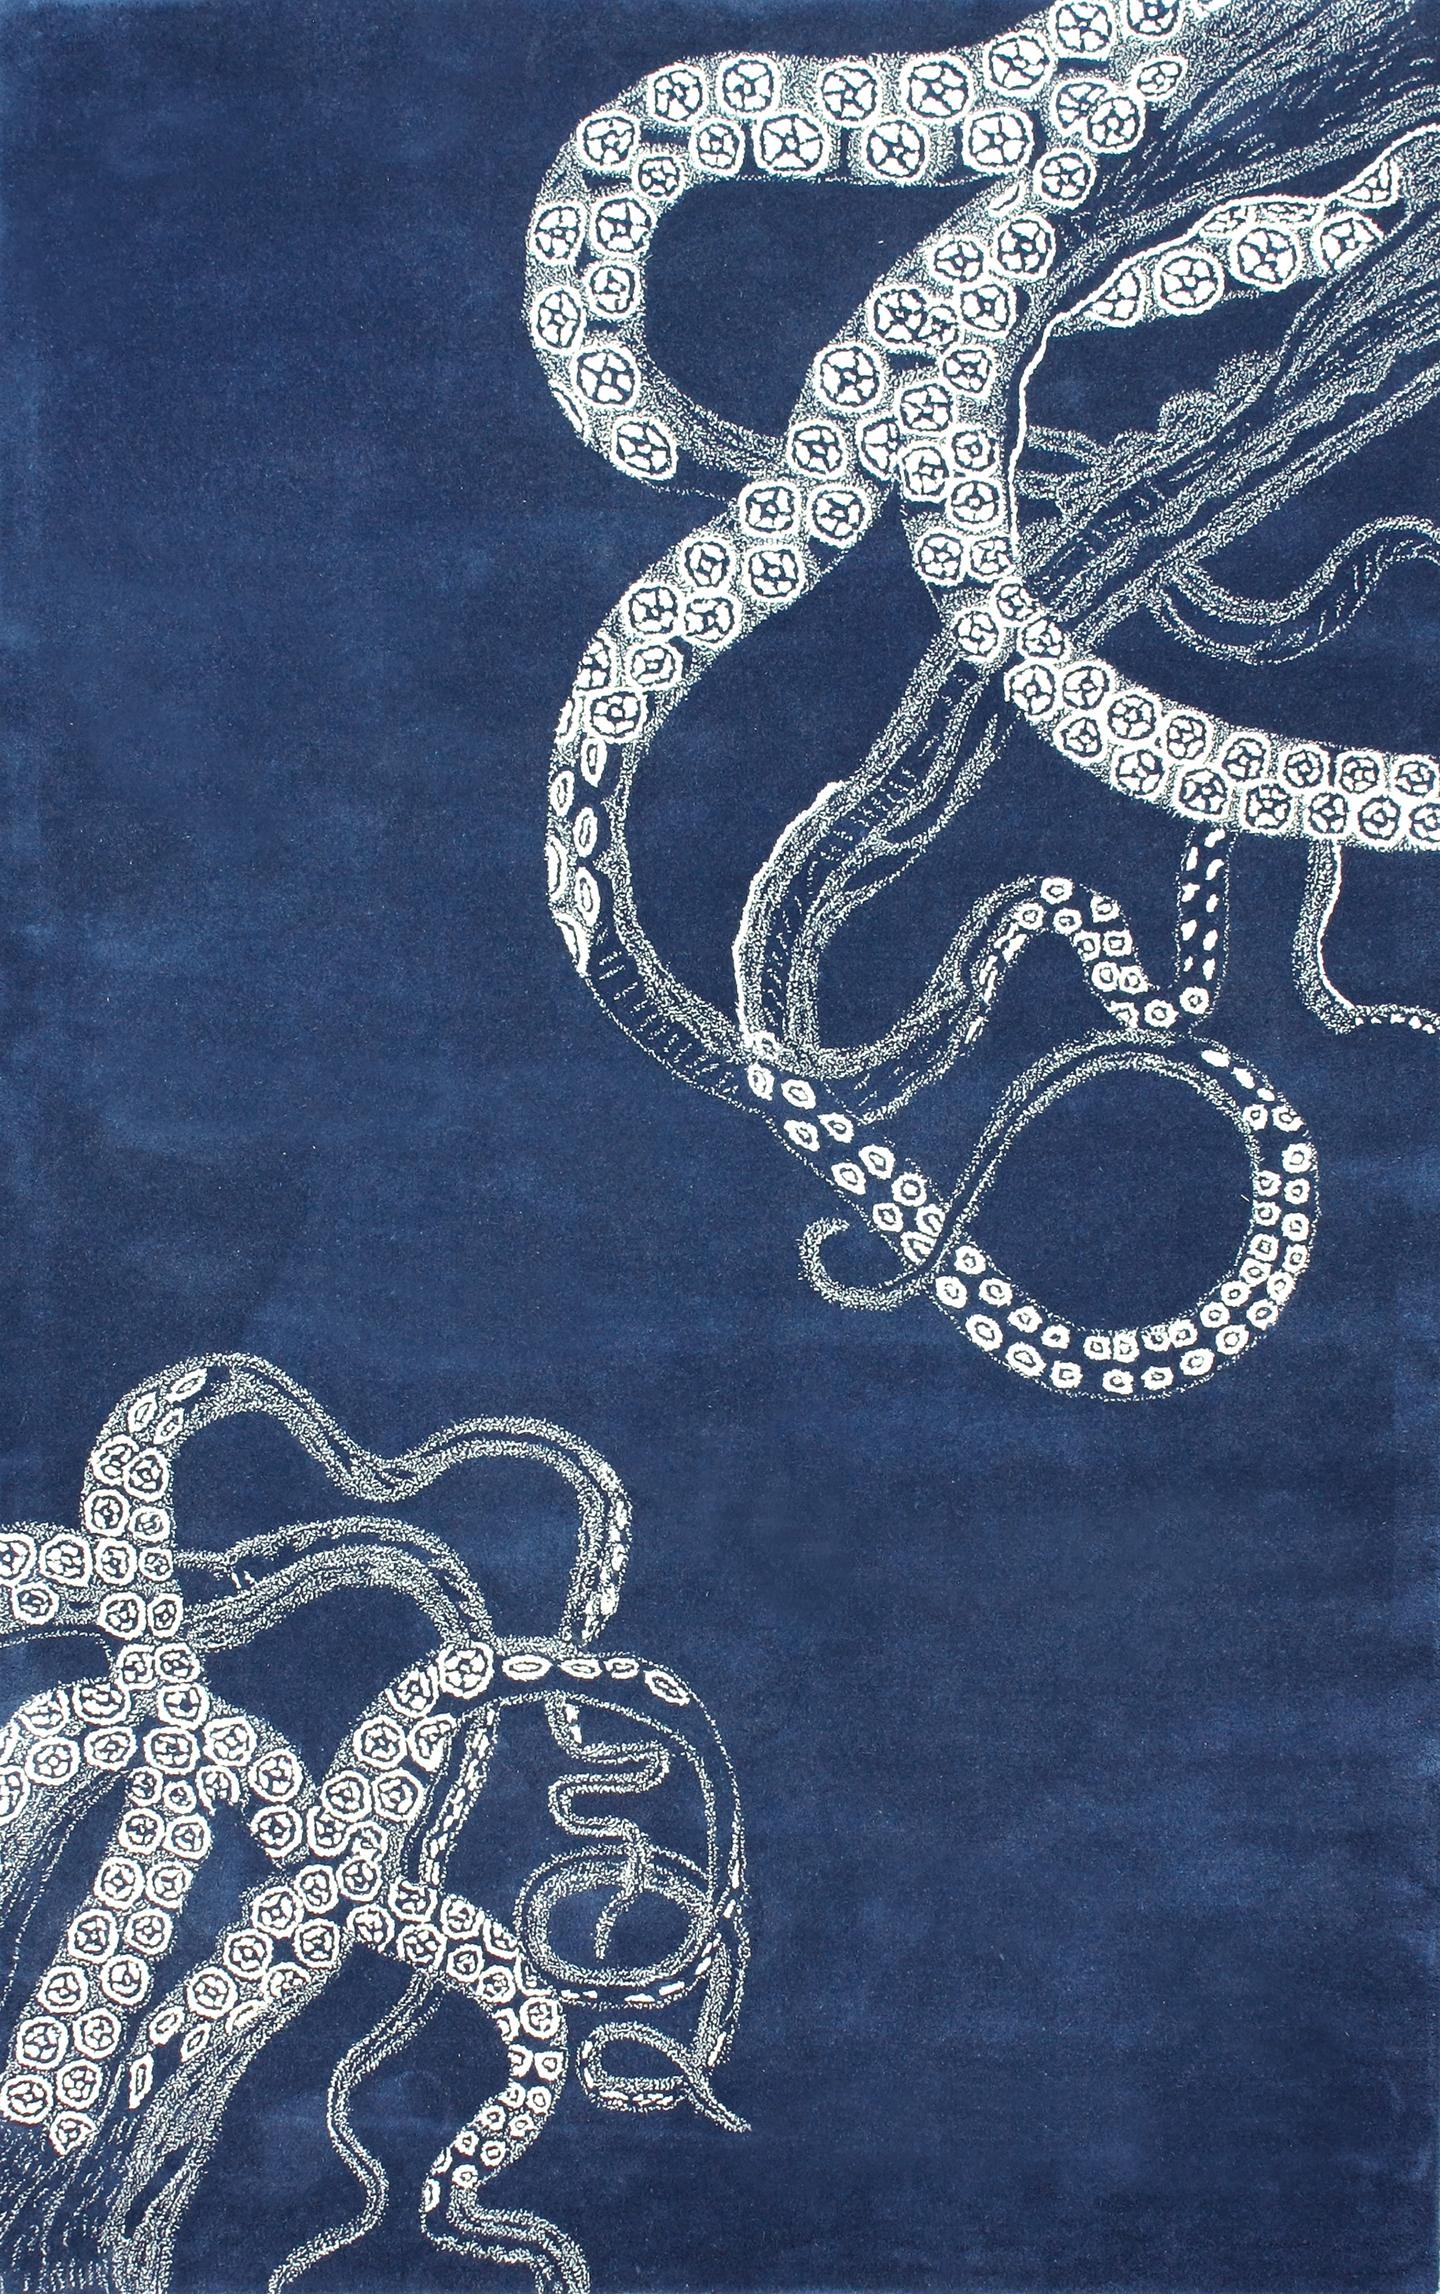  Hand Tufted Octopus Tail Area Rug - Image 1